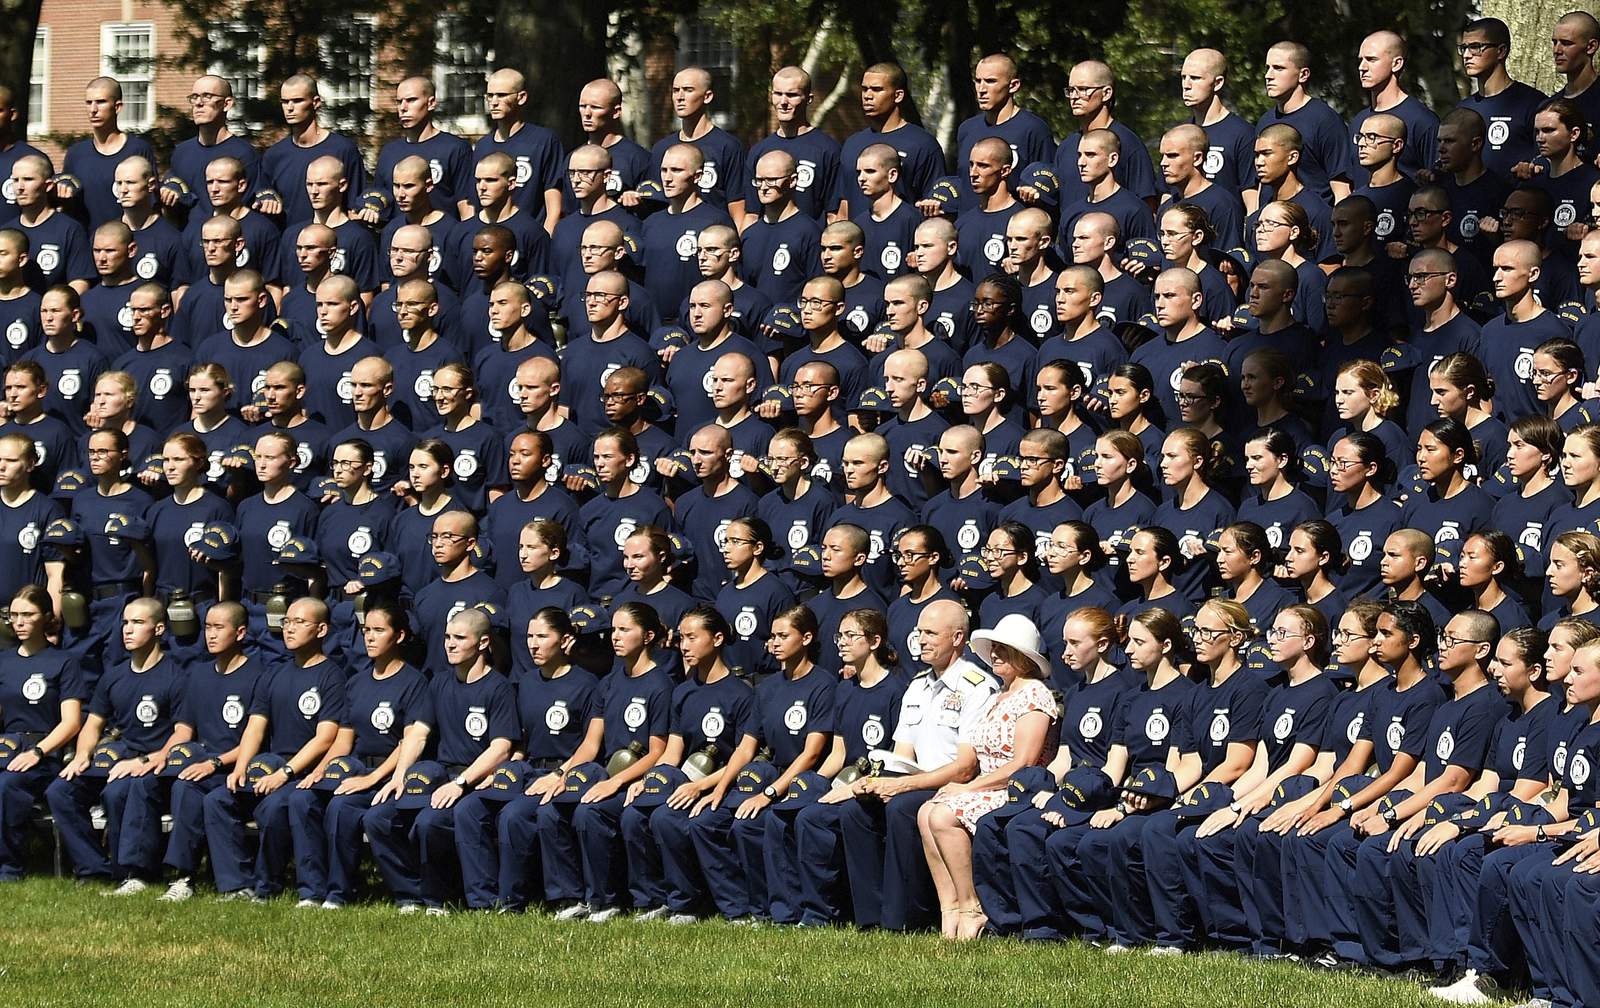 Coast Guard Academy faulted on response to racial incidents